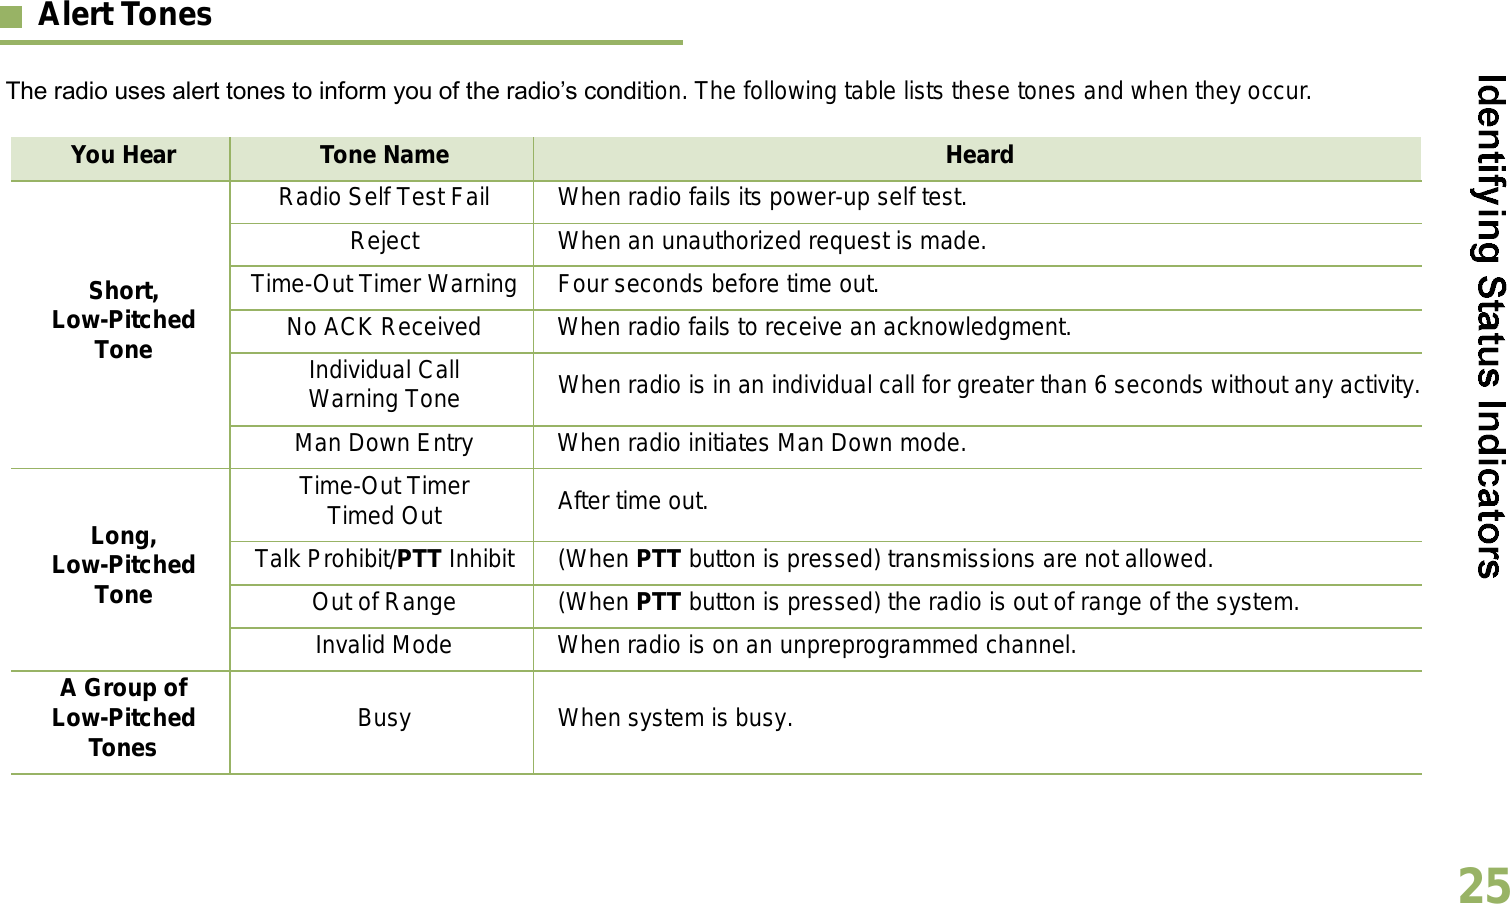 English25Alert TonesThe radio uses alert tones to inform you of the radios condition. The following table lists these tones and when they occur.You Hear Tone Name HeardShort, Low-Pitched ToneRadio Self Test Fail When radio fails its power-up self test.Reject When an unauthorized request is made.Time-Out Timer Warning Four seconds before time out.No ACK Received When radio fails to receive an acknowledgment.Individual Call Warning Tone When radio is in an individual call for greater than 6 seconds without any activity.Man Down Entry When radio initiates Man Down mode.Long, Low-Pitched ToneTime-Out Timer Timed Out After time out.Talk Prohibit/PTT Inhibit (When PTT button is pressed) transmissions are not allowed.Out of Range (When PTT button is pressed) the radio is out of range of the system.Invalid Mode When radio is on an unpreprogrammed channel.A Group of Low-Pitched Tones Busy When system is busy.